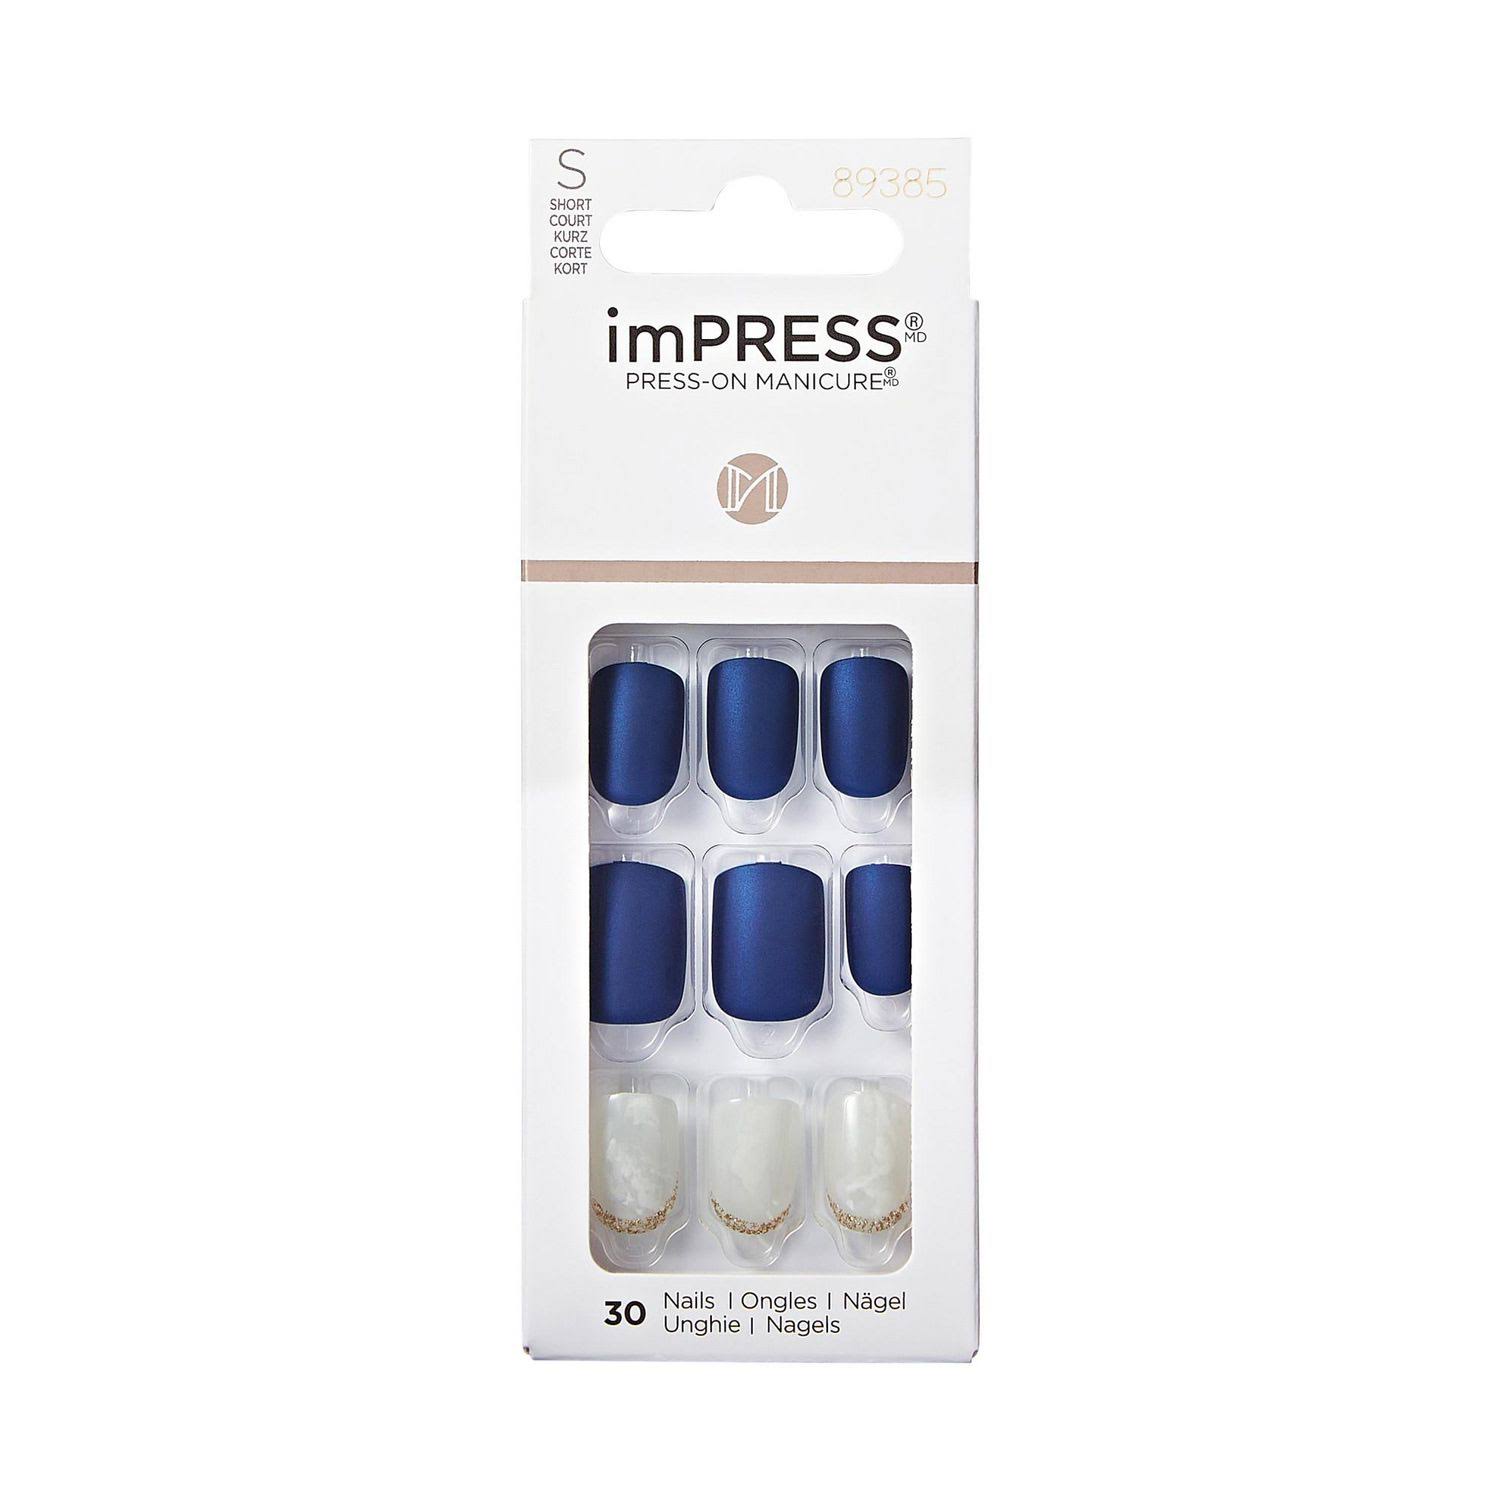 Kiss Impress Press On Nails One Step Manicure New Chasing Stars Short Length